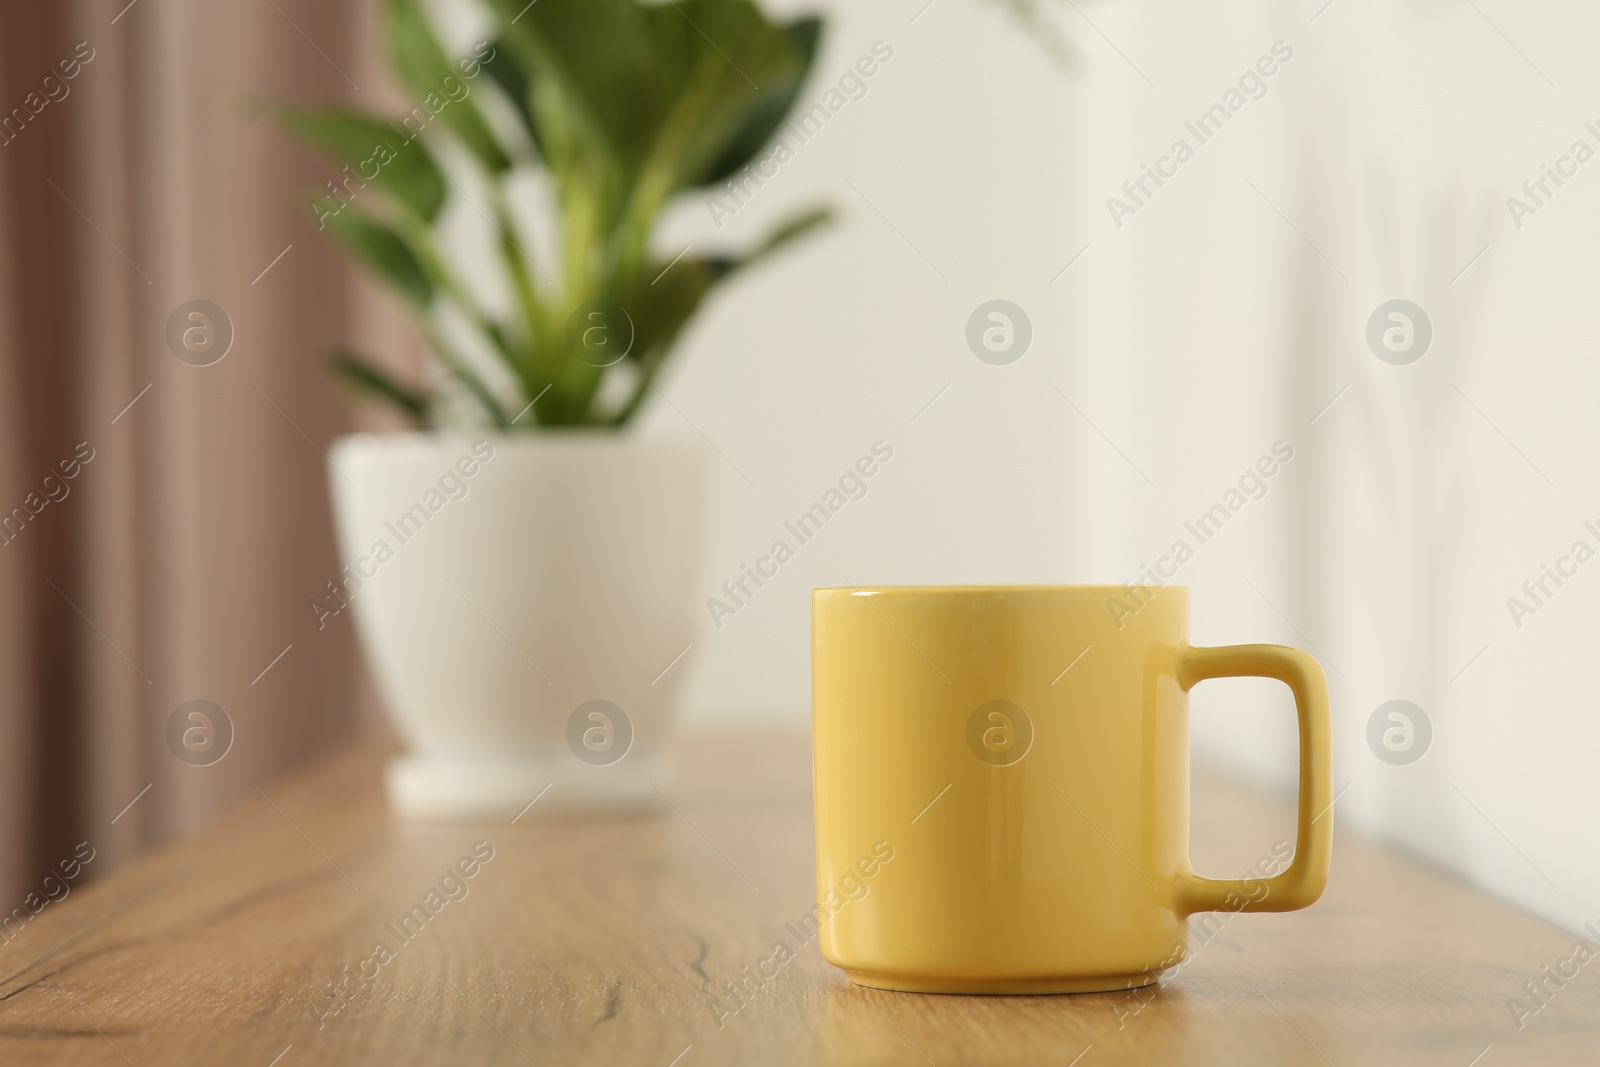 Photo of Yellow mug on wooden table indoors. Mockup for design